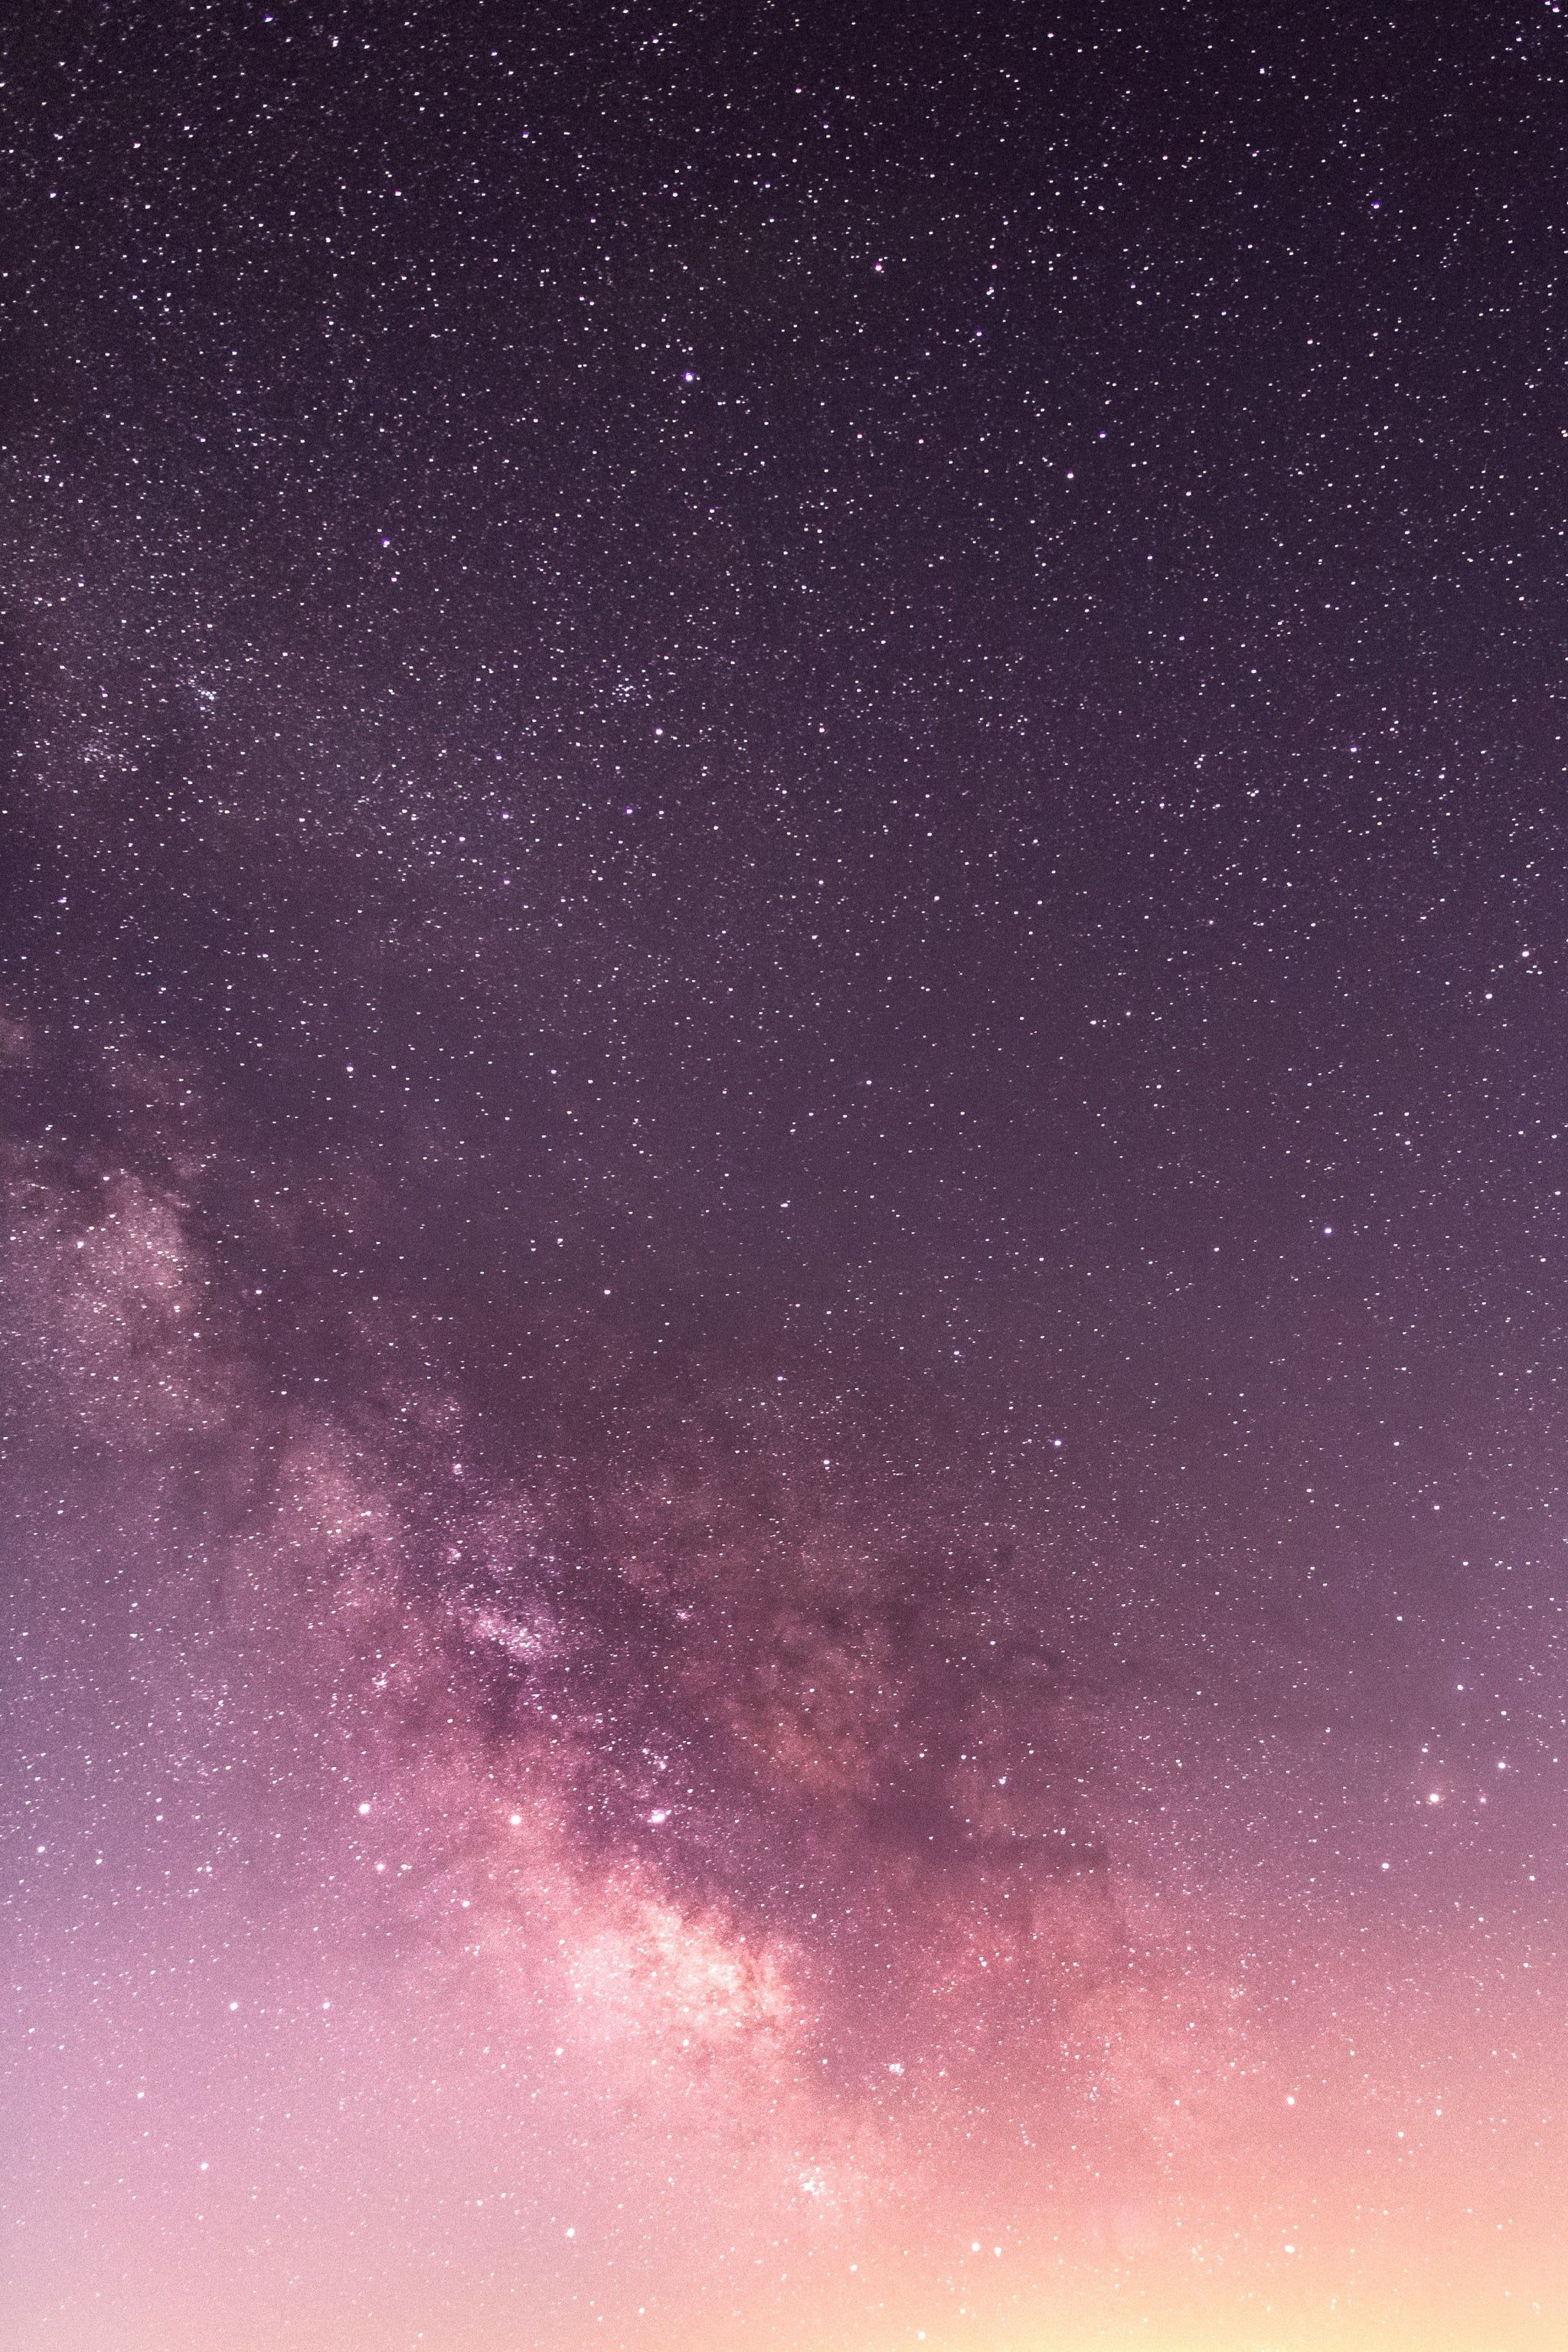 Night Sky iPhone Wallpaper. The Best Wallpaper Ideas That'll Make Your Phone Look Aesthetically Pleasing